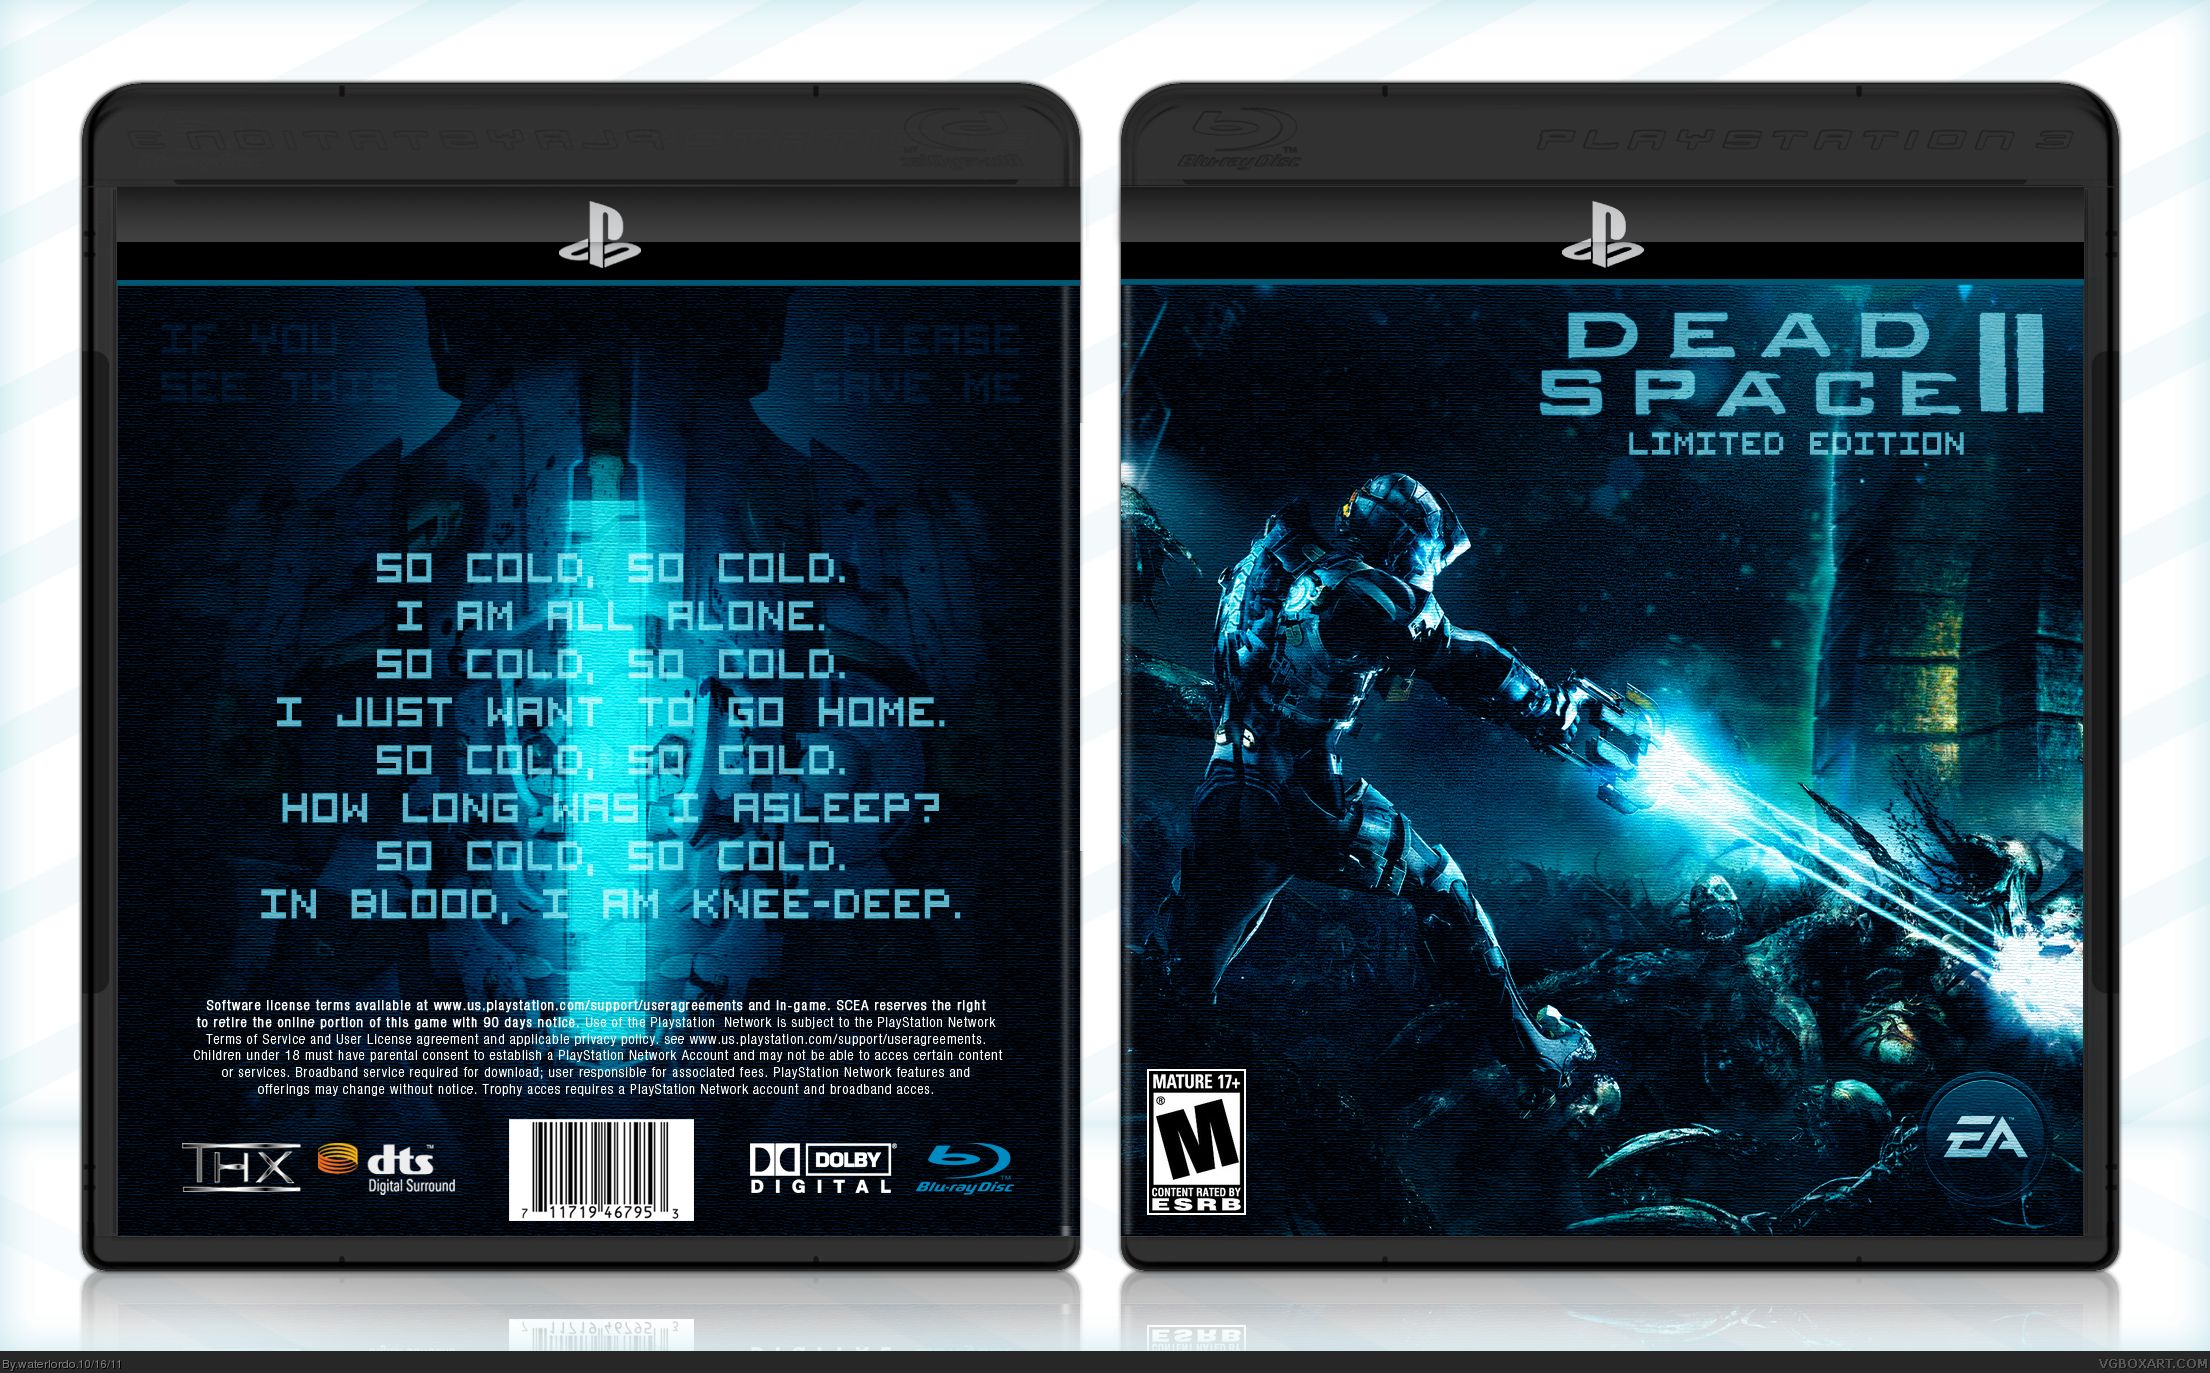 Dead Space 2: Limited Edition box cover